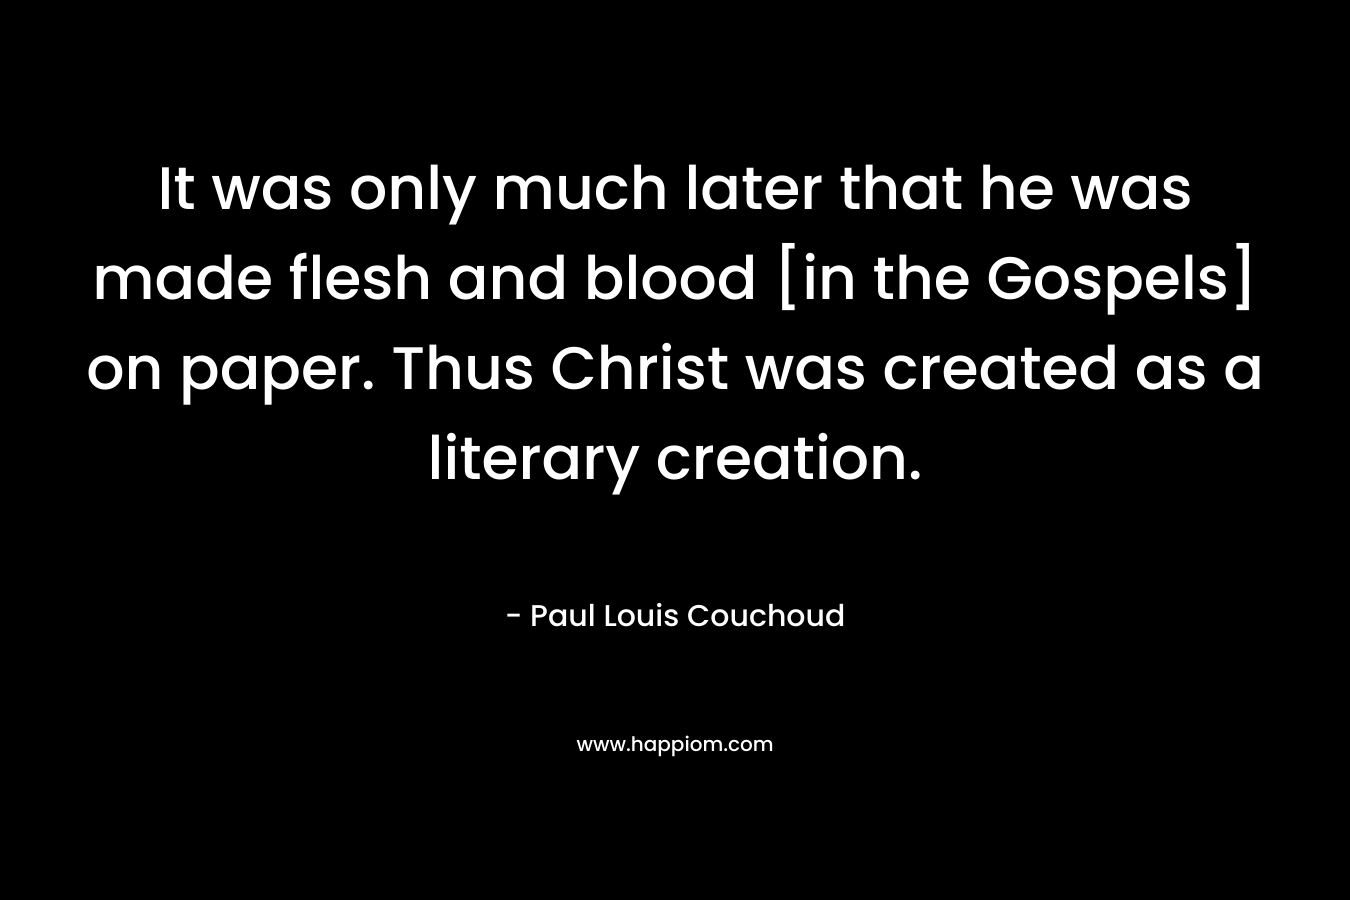 It was only much later that he was made flesh and blood [in the Gospels] on paper. Thus Christ was created as a literary creation. – Paul Louis Couchoud